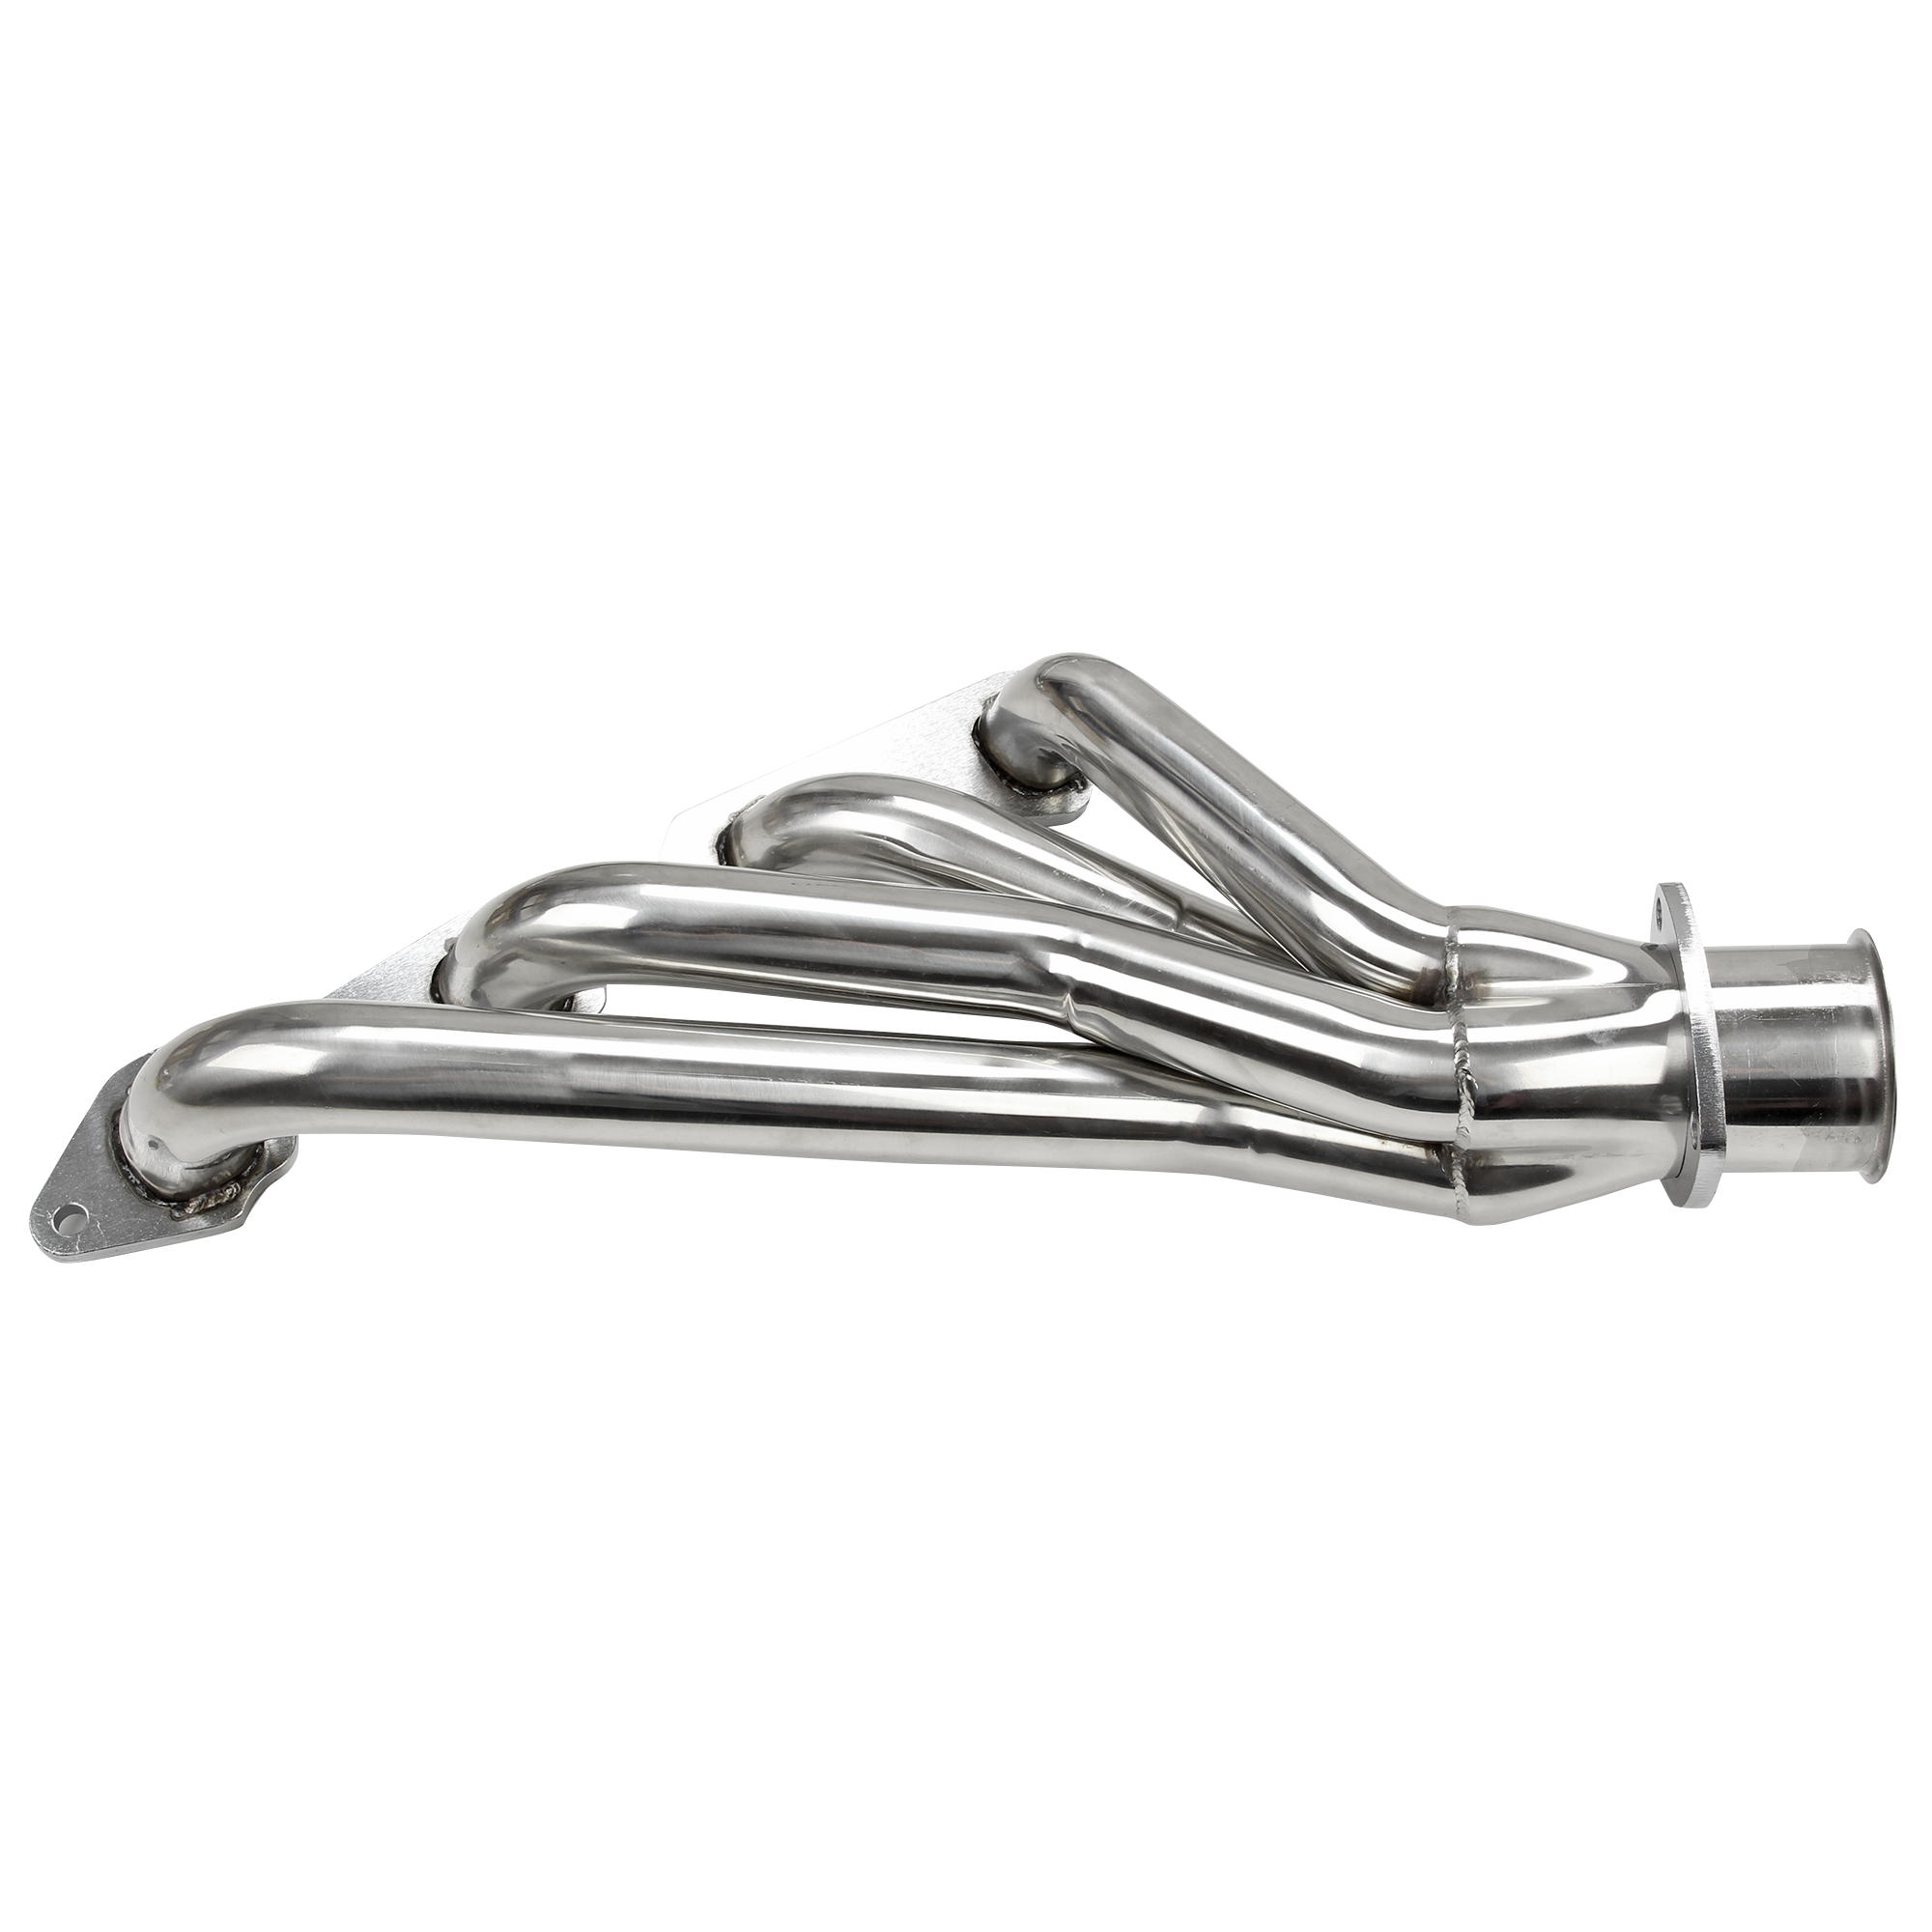 Elite, Shorty, Steel, Thermal Coated Exhaust Header for Chevy, Car, 396, 402, 427, 454, Pair